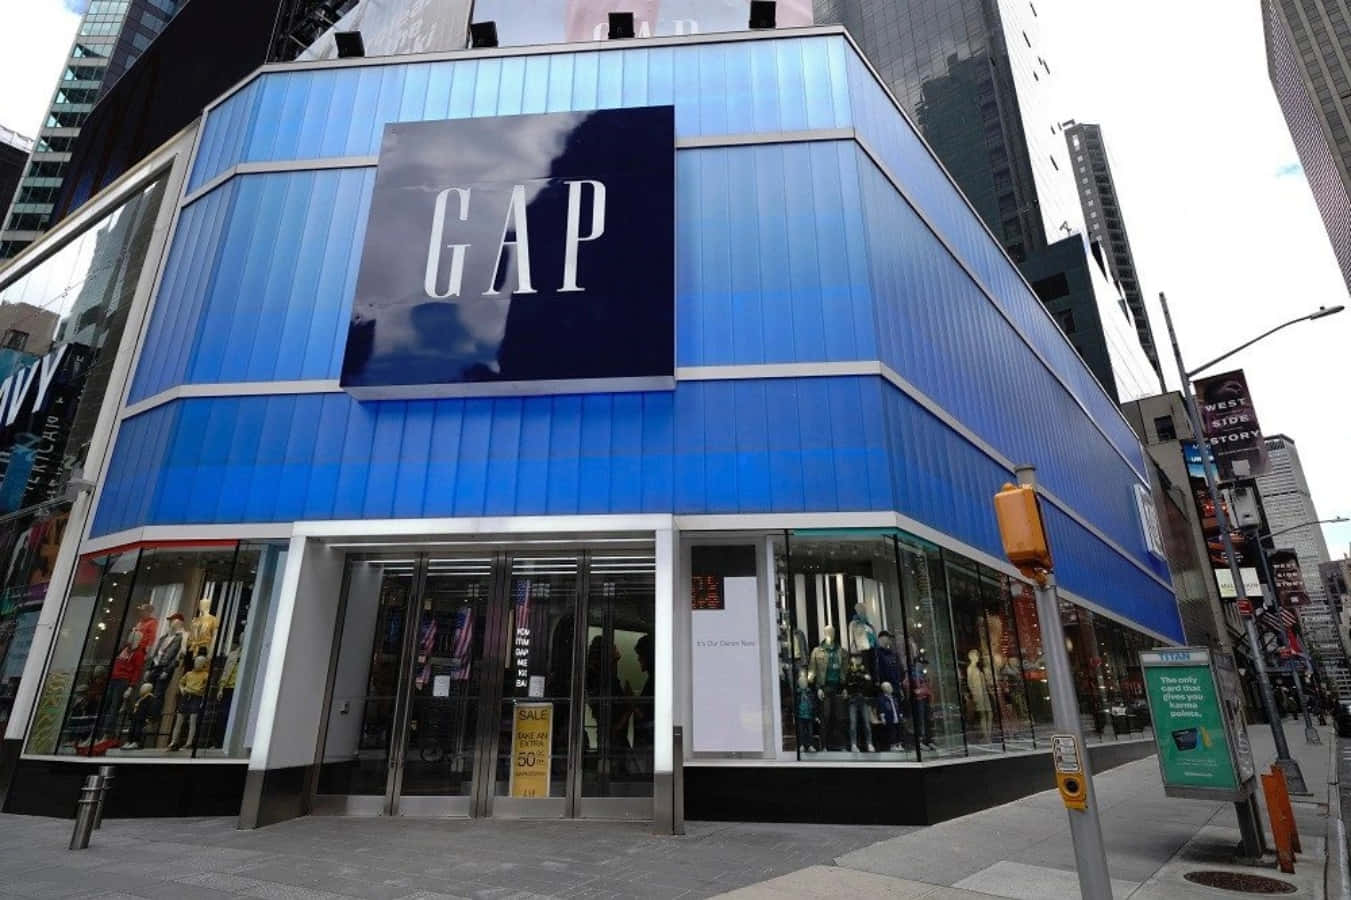 Gap - A Blue Building With A Sign